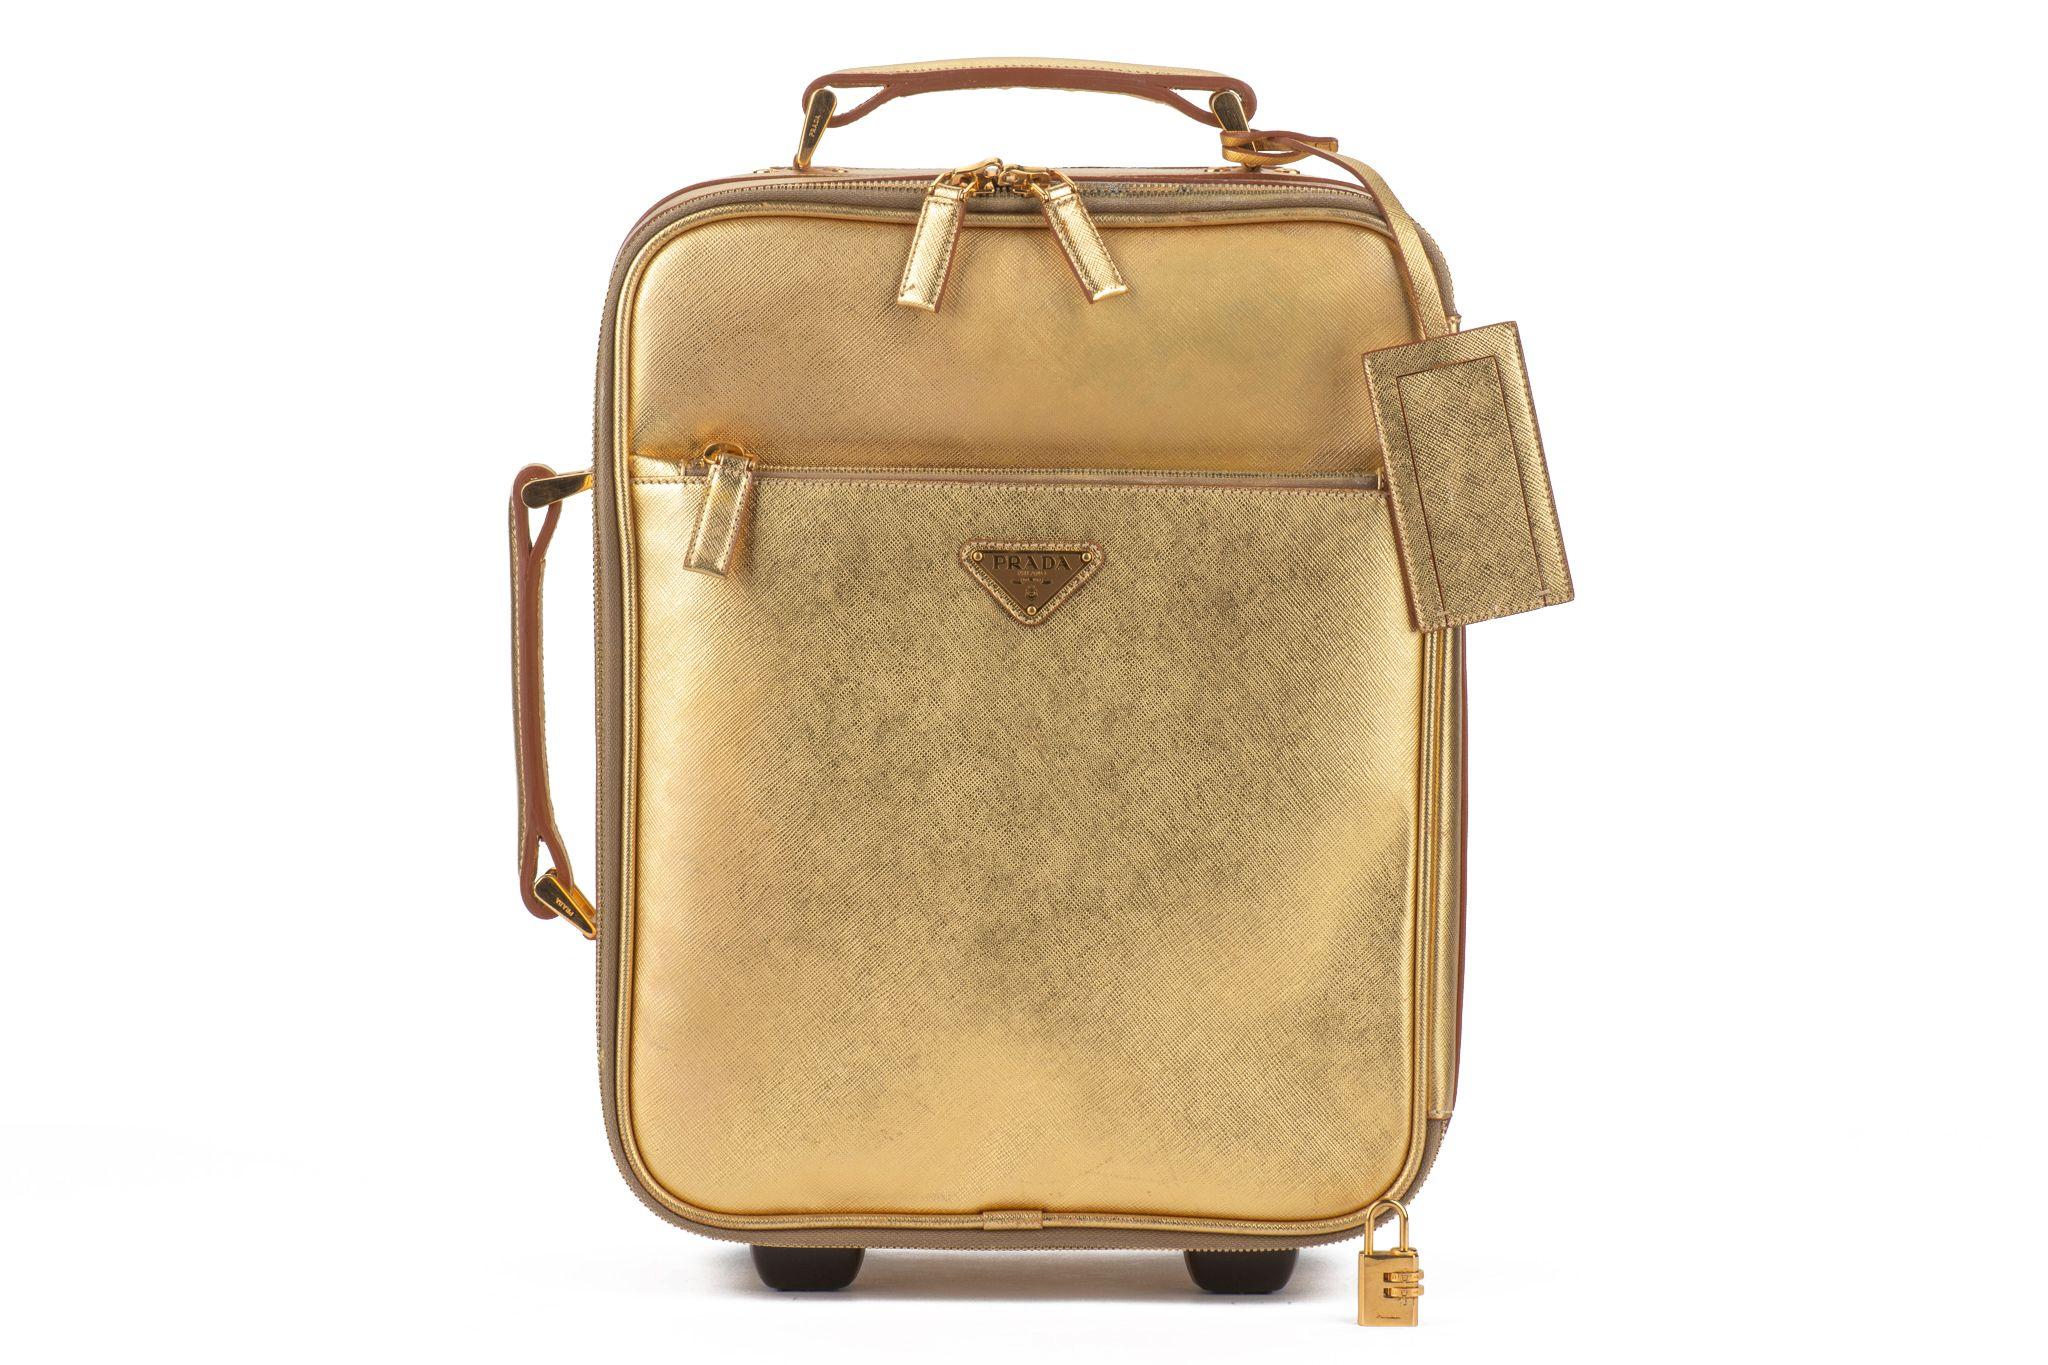 Prada super chic and rare small gold saffiano leather carry on suitcase. Mint interior and very minor interior scuffs. 
Lock with combination, label for name. Generic dustcover. 